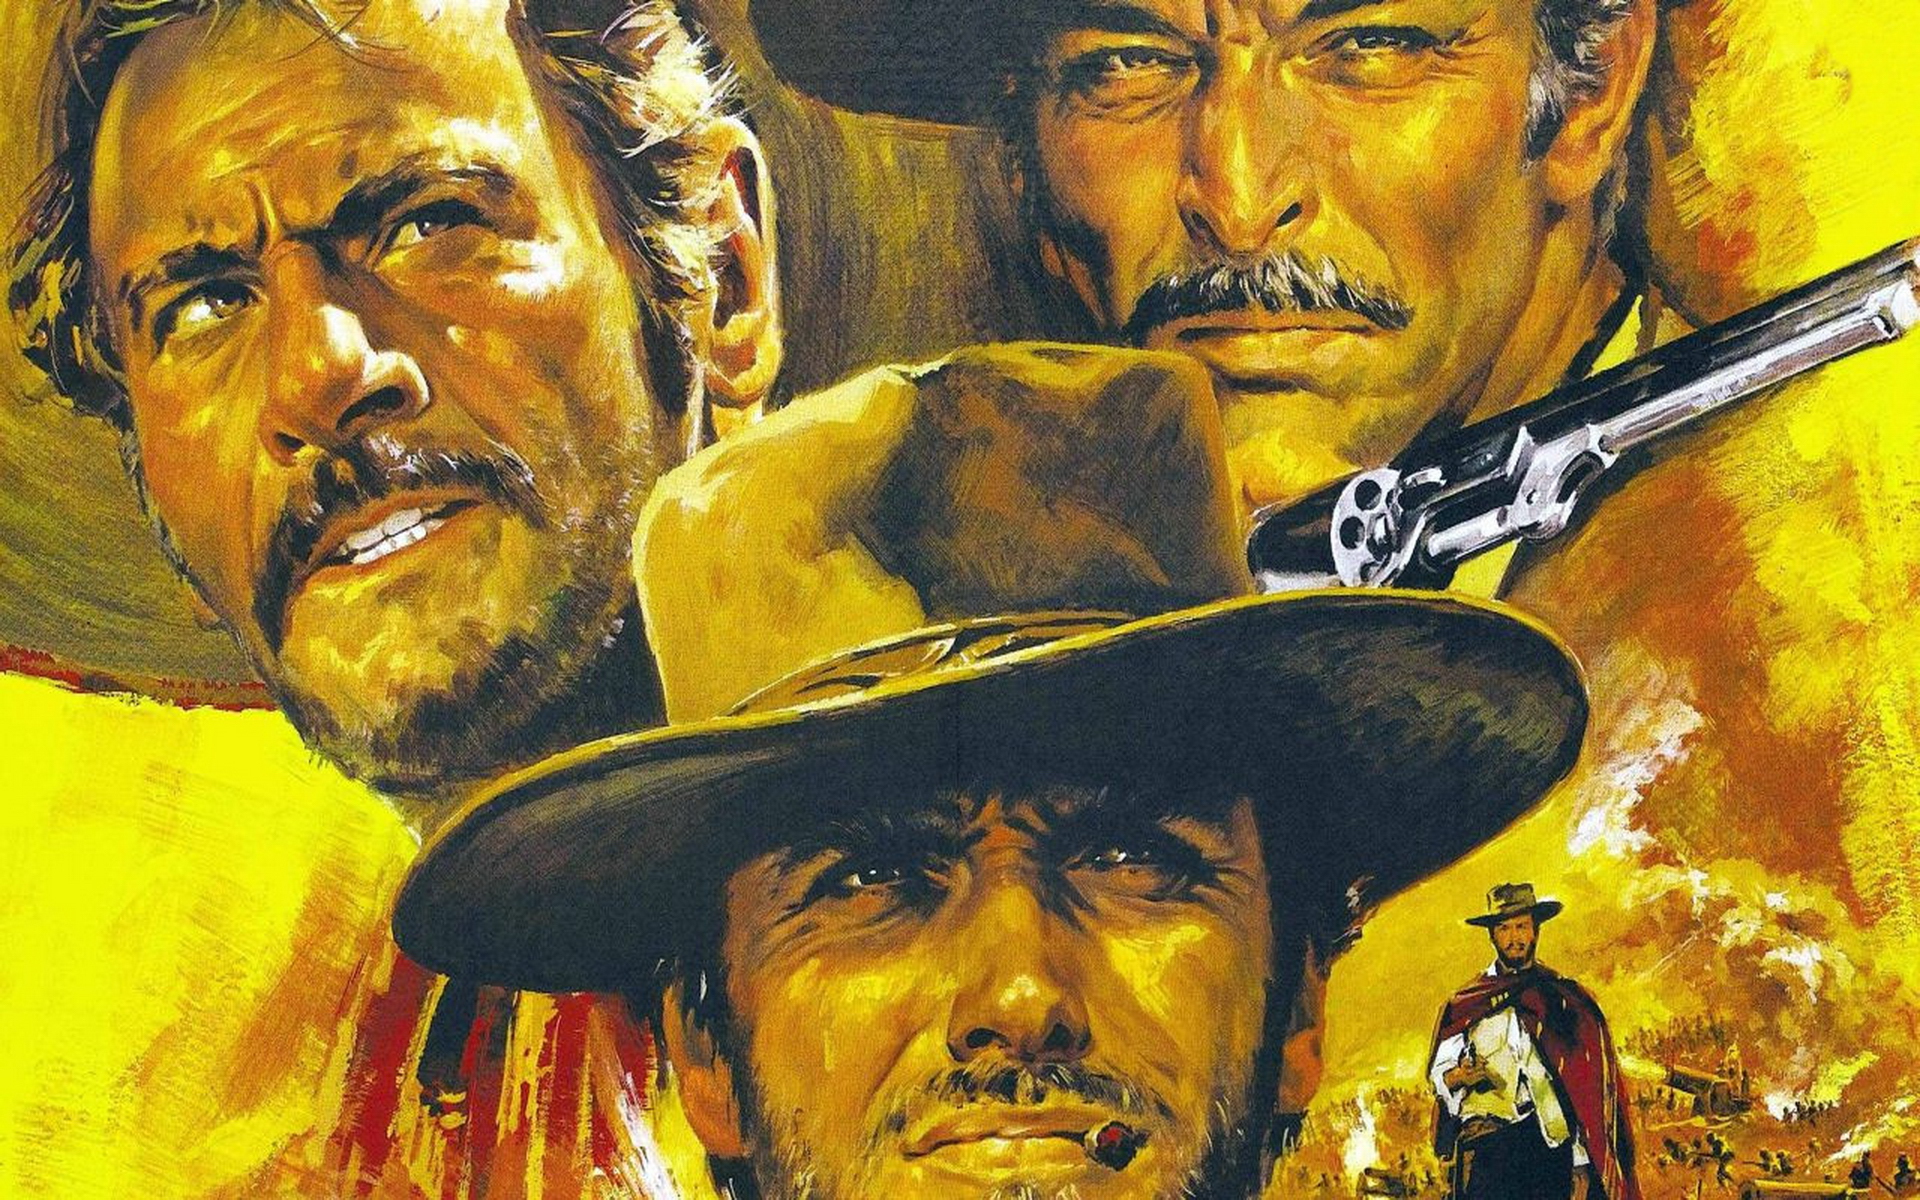 Clint Eastwood Eli Wallach Lee Van Cleef Sentenza The Good The Bad And The Ugly Tuco Western 1920x1200